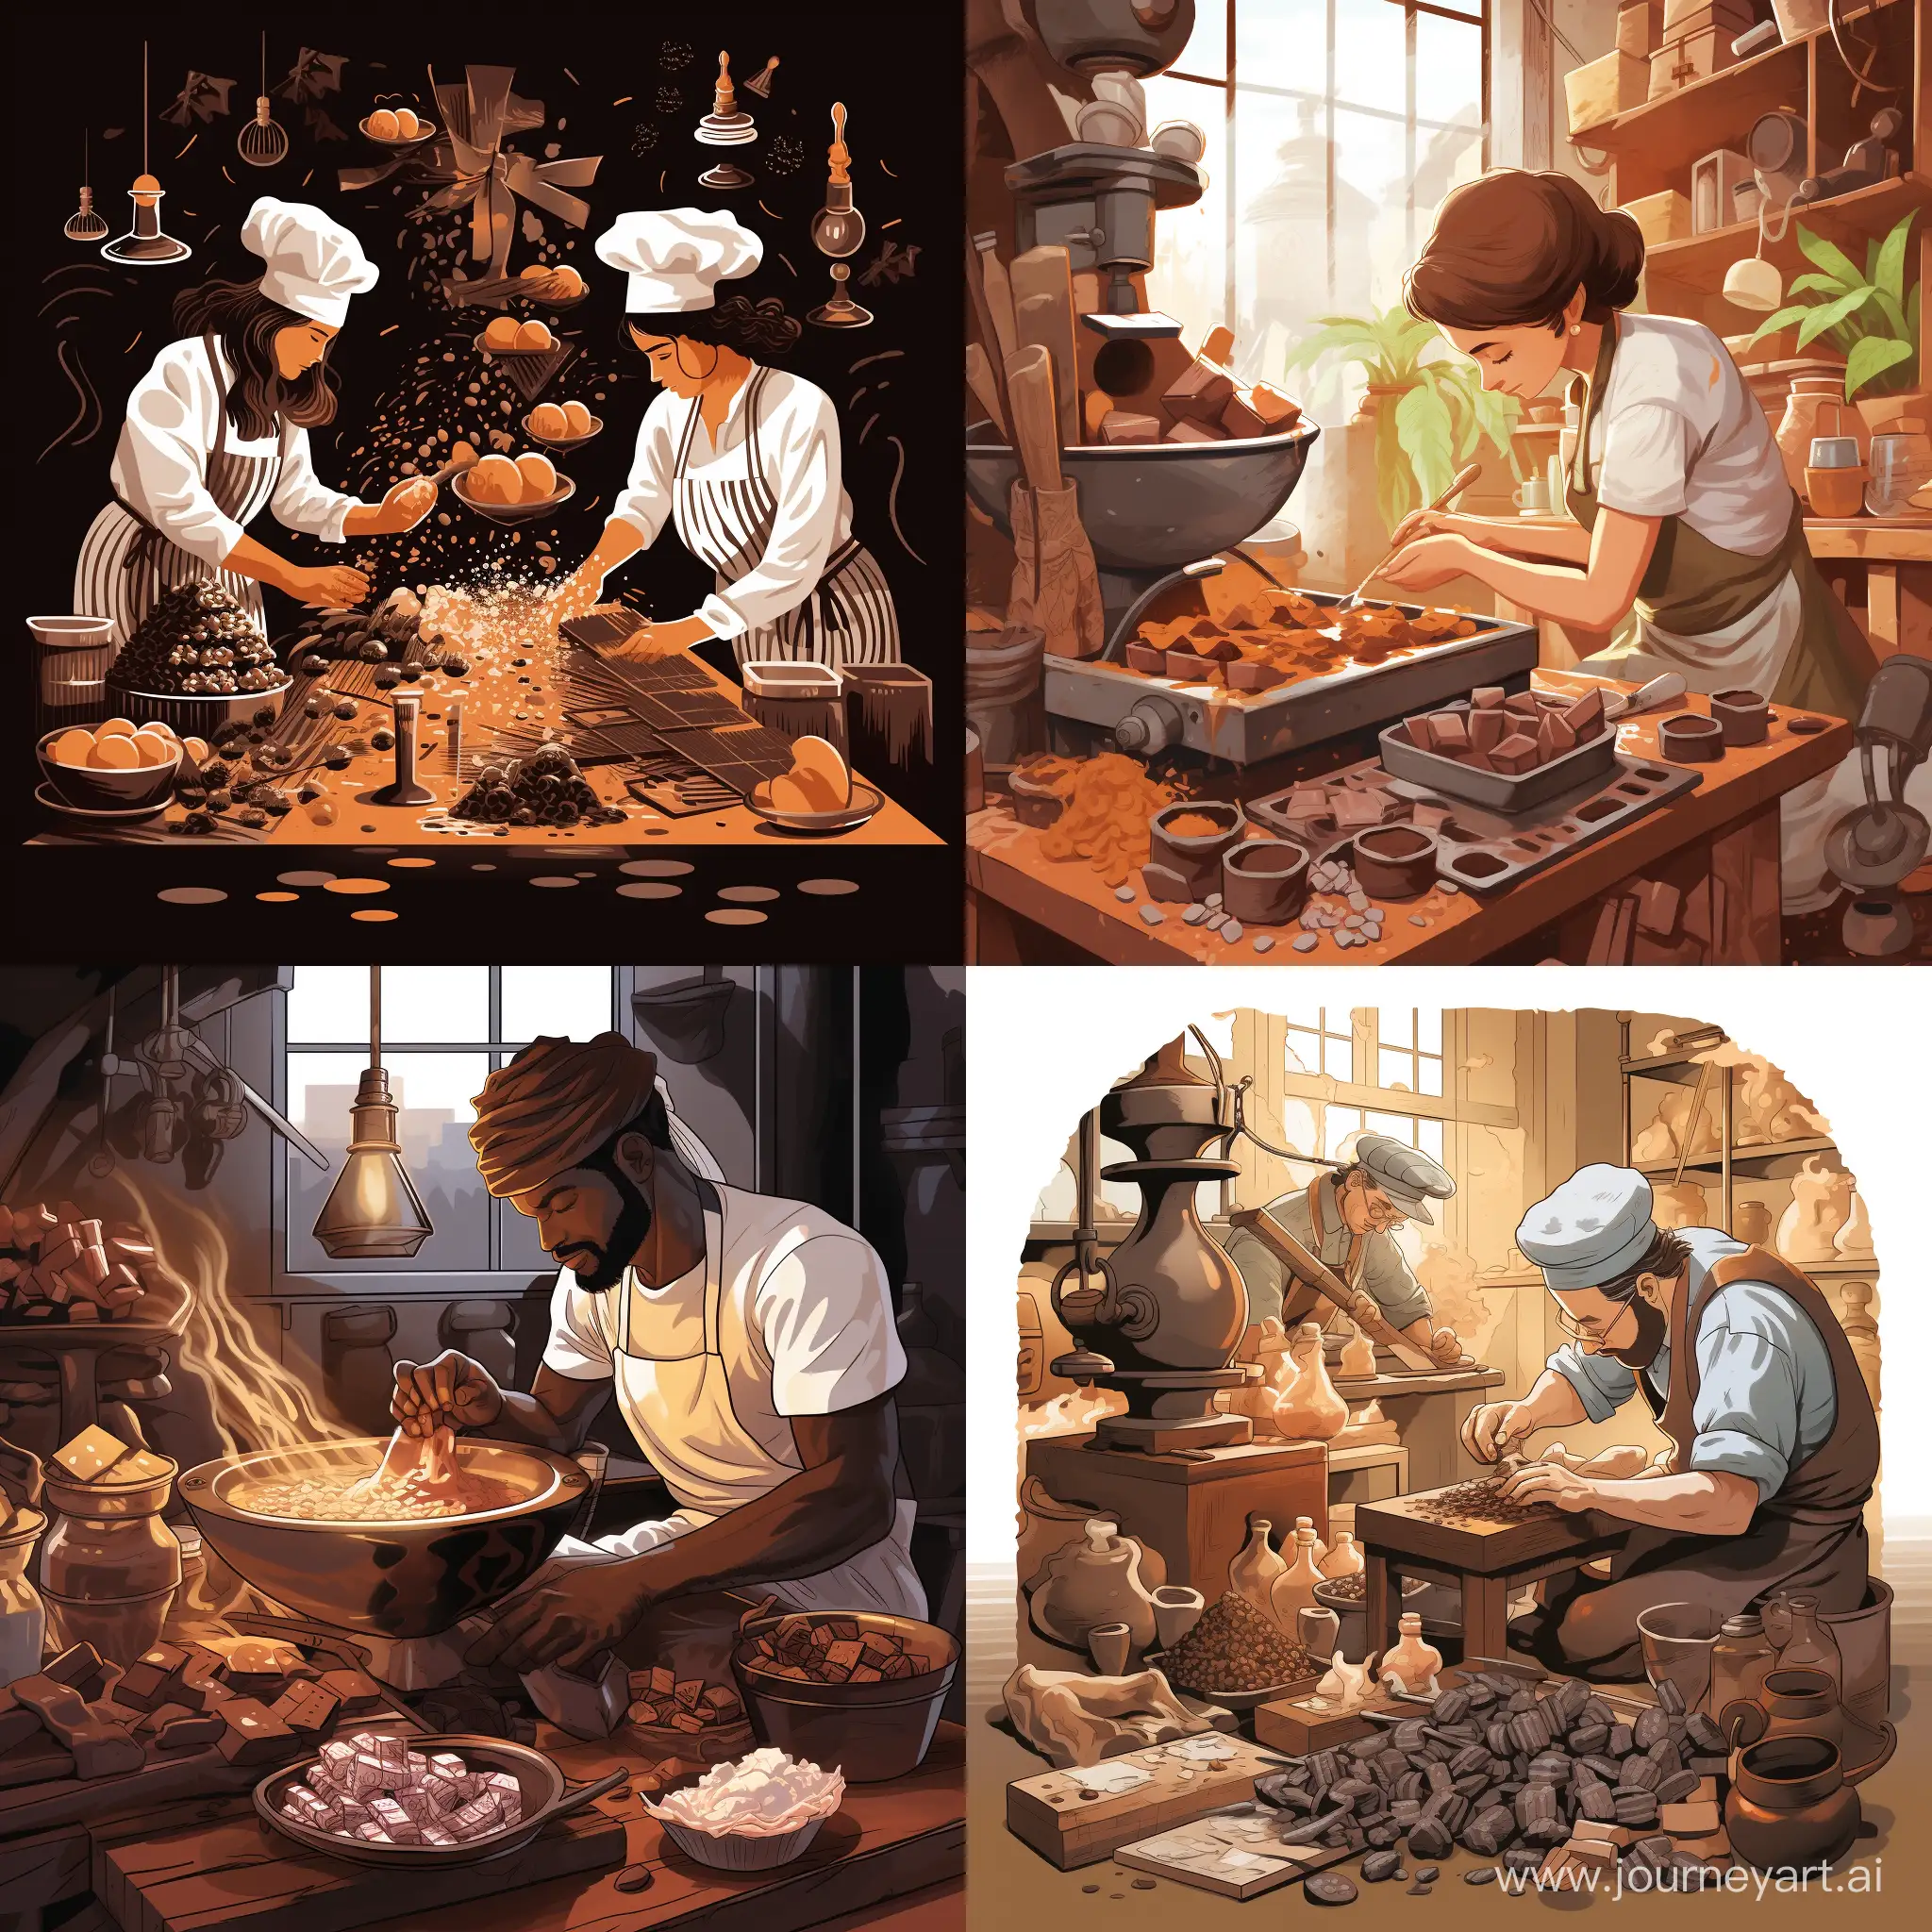 Illustration about chocolate making